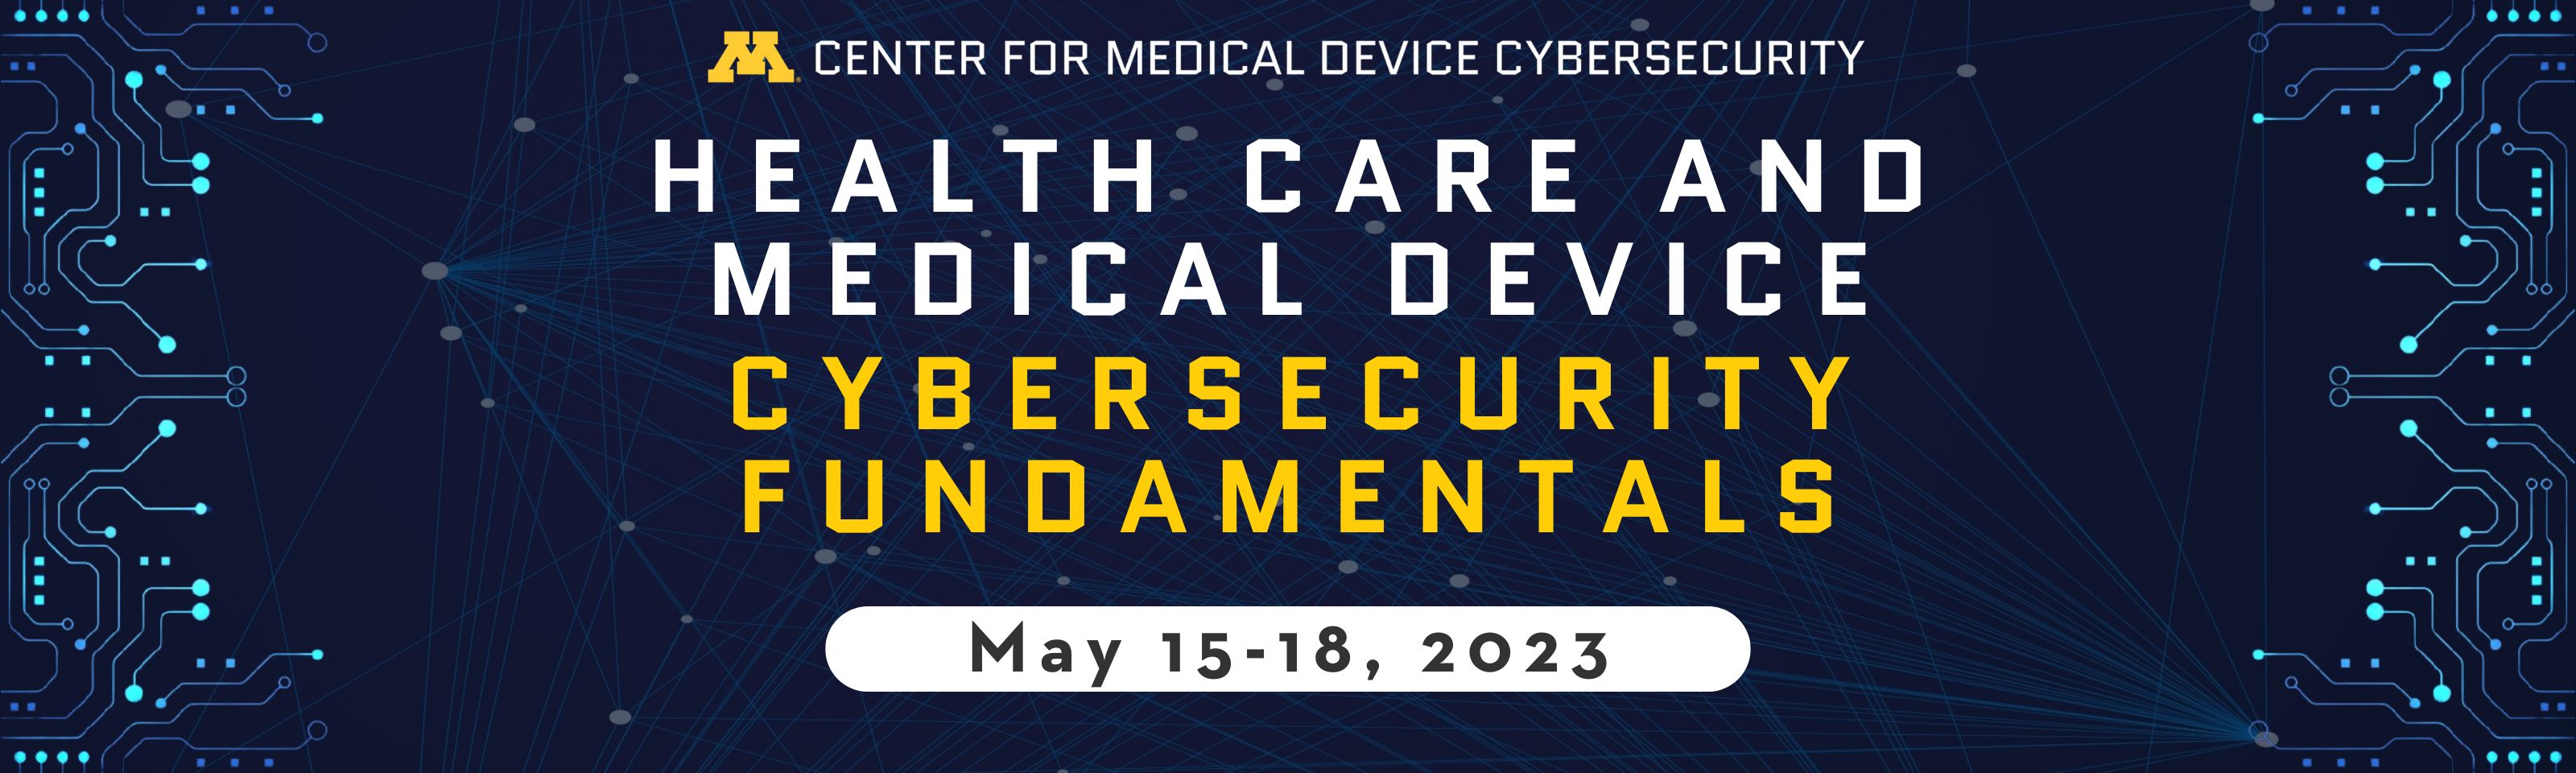 Health Care and Medical Device CYBERSECURITY Fundamentals banner .jpg